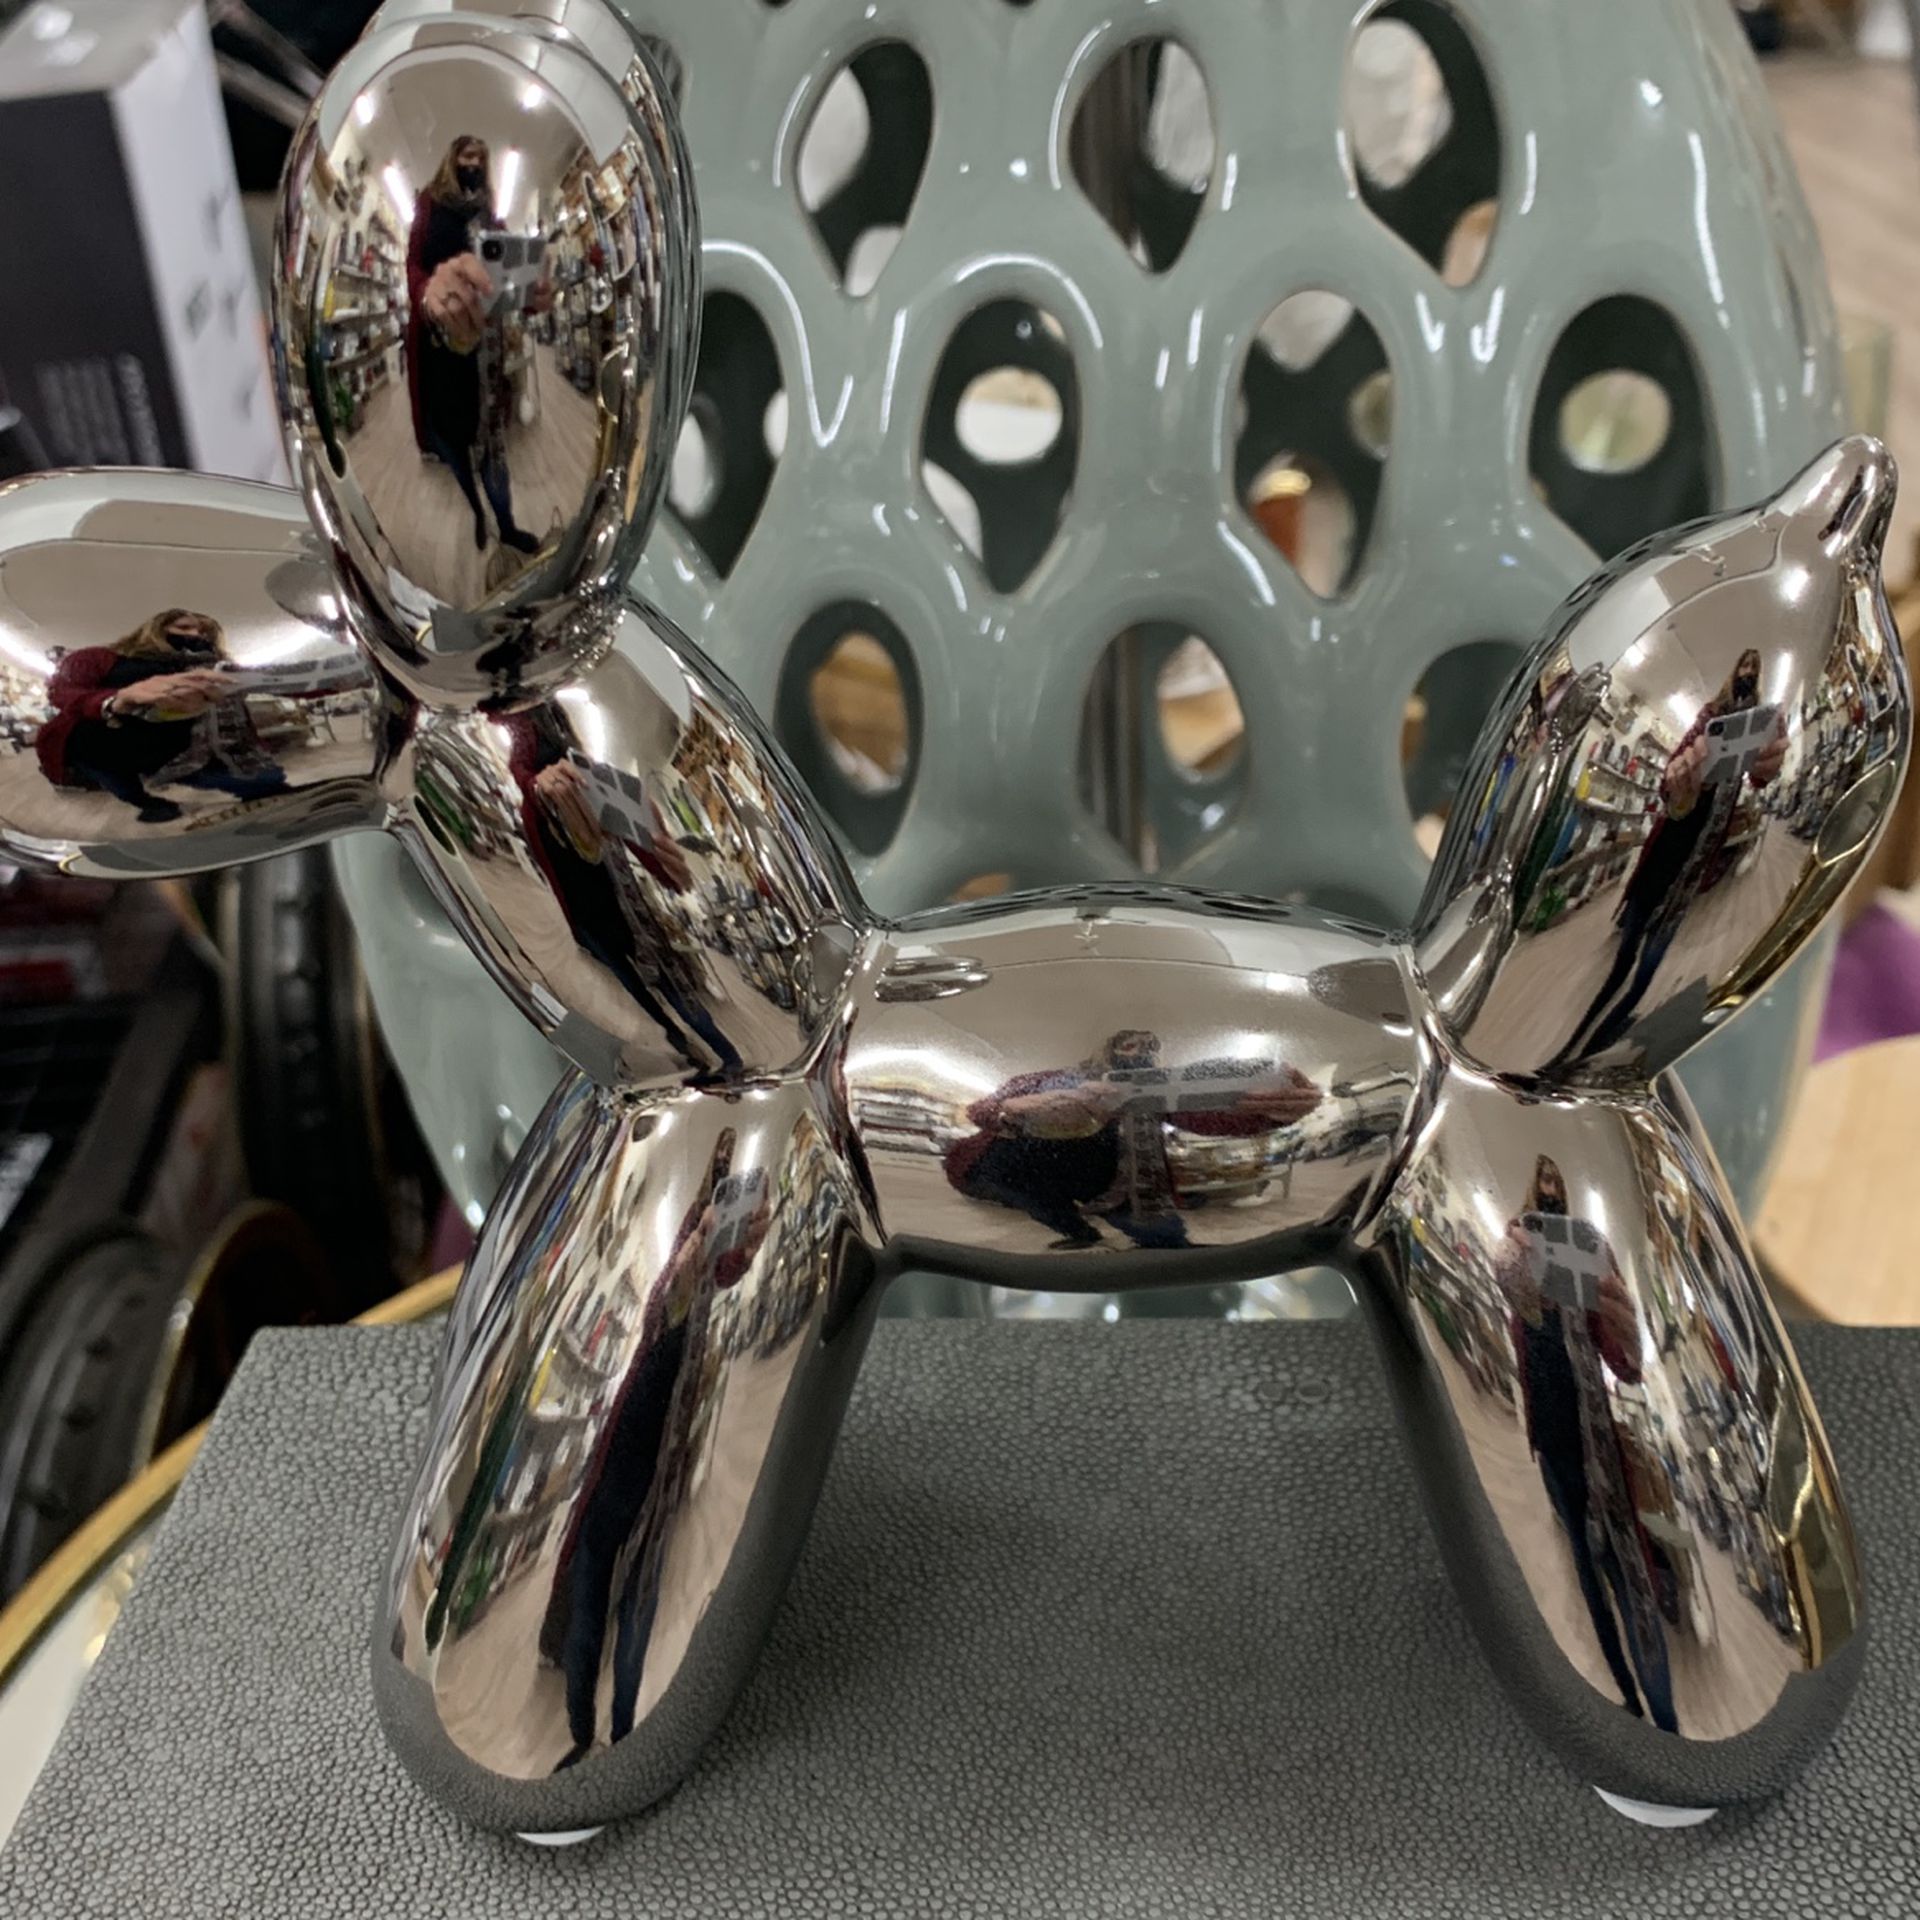  Sculpture,Shiny Balloons Dog Statue Simulation Dogs Animal Art Sculpture Resin Craftwork Home Decoration Accessories,Silver,17cm6cm17cm